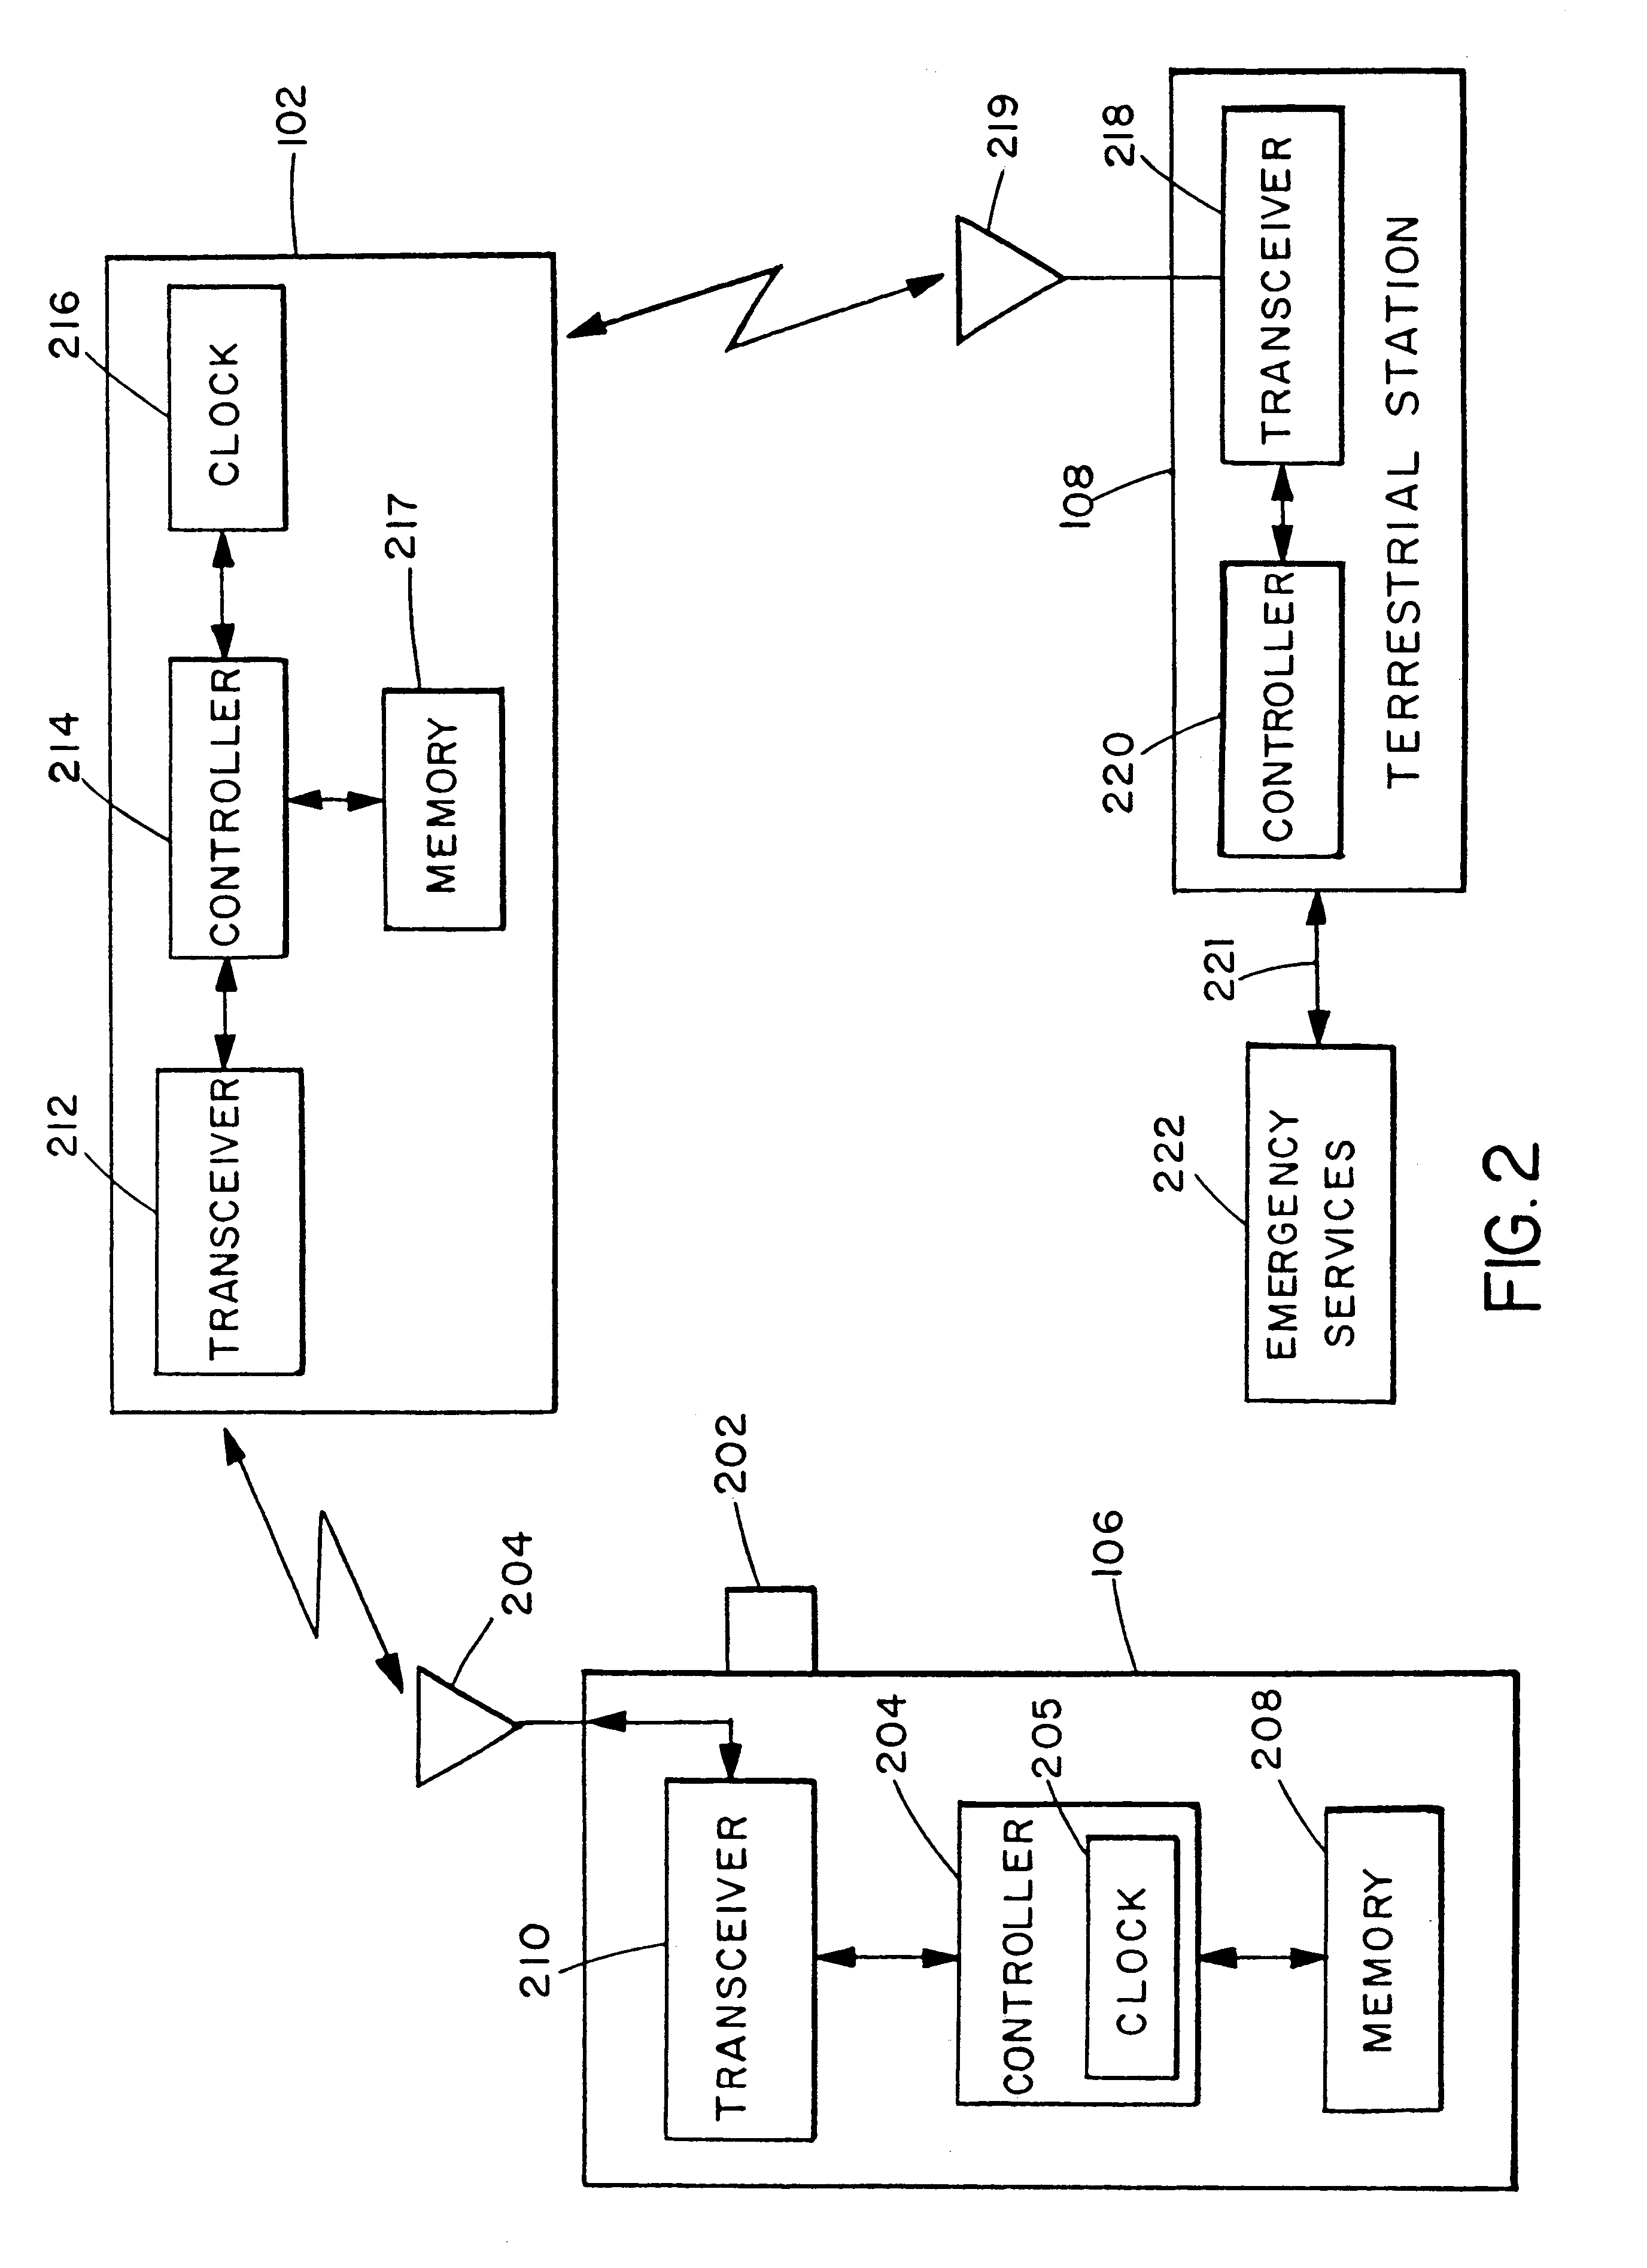 Method and apparatus for determining a geographical location of a mobile communication unit